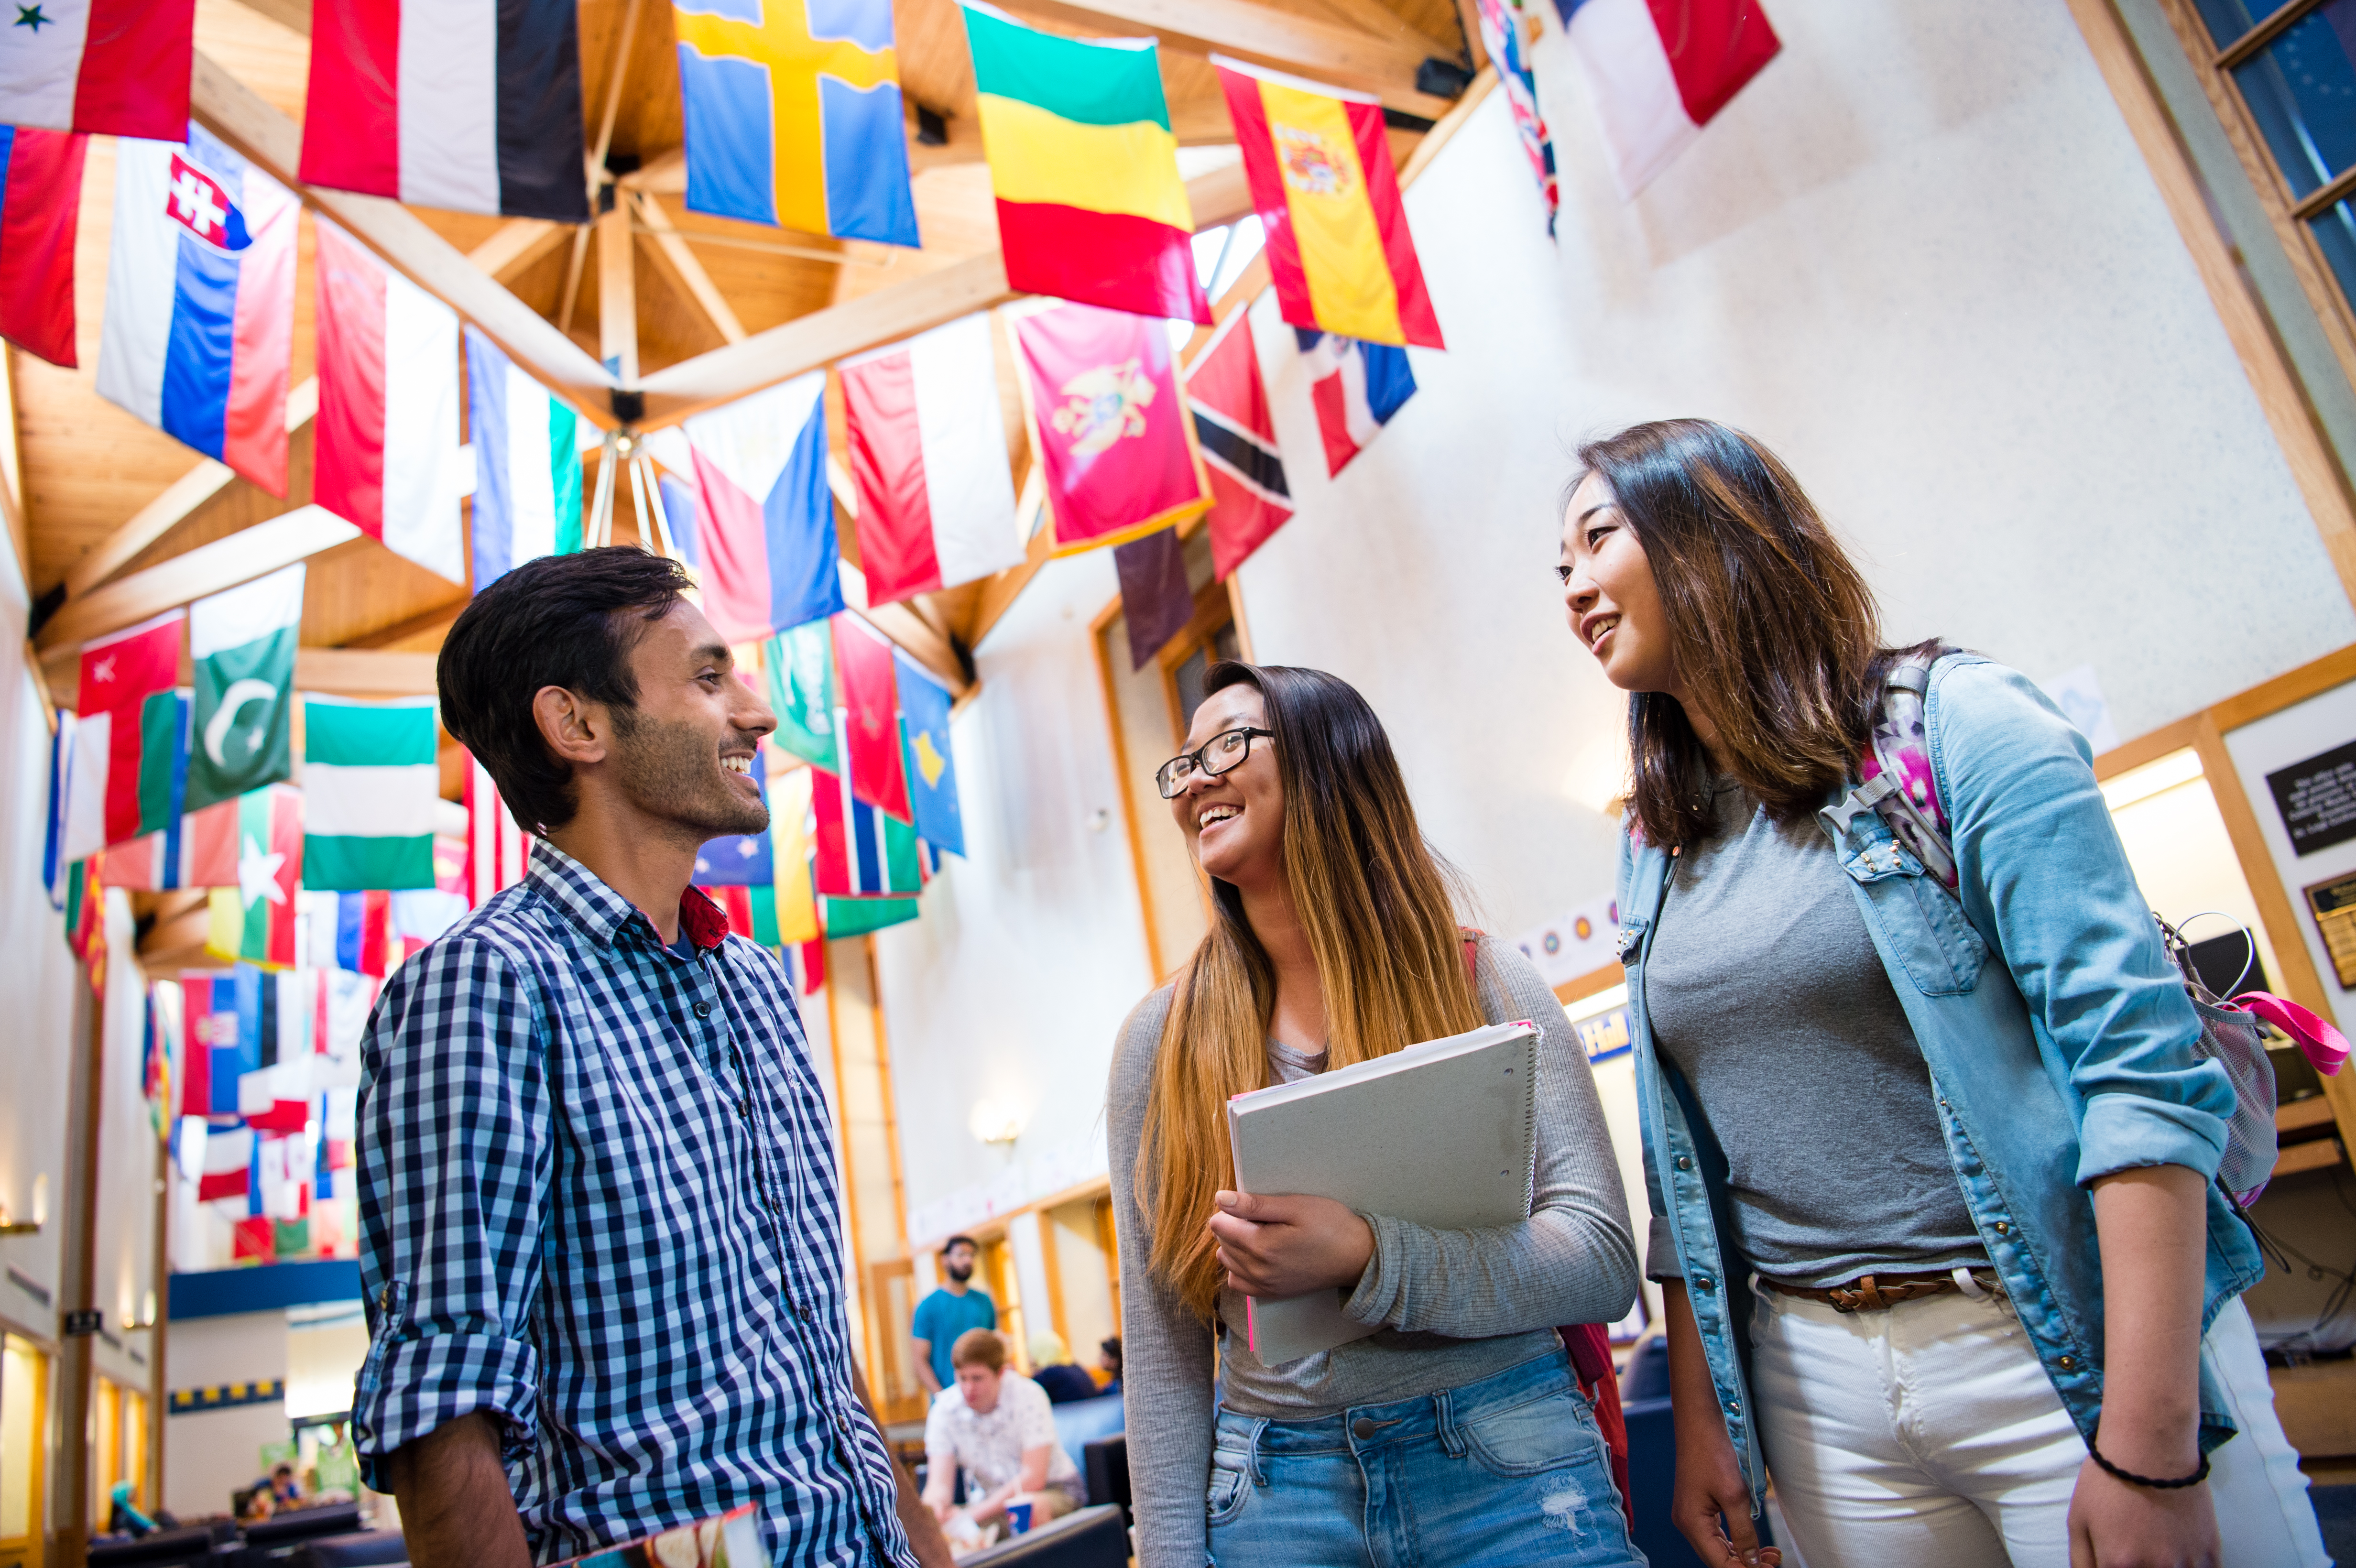 Picture of three students conversing below various hanging national flags